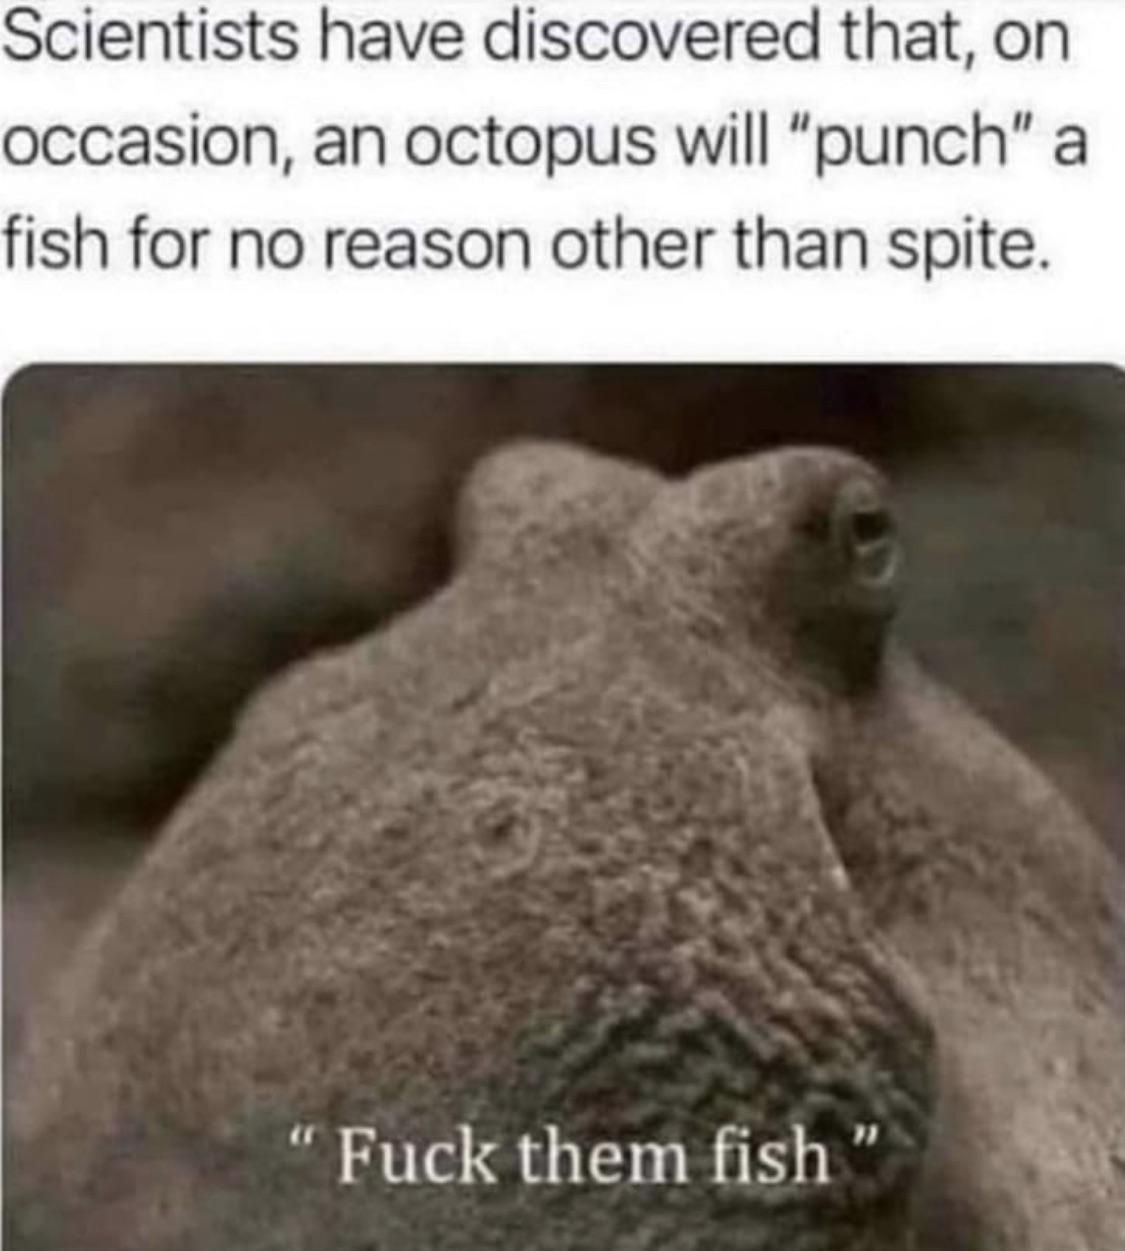 Those fish don’t know what’s coming to them